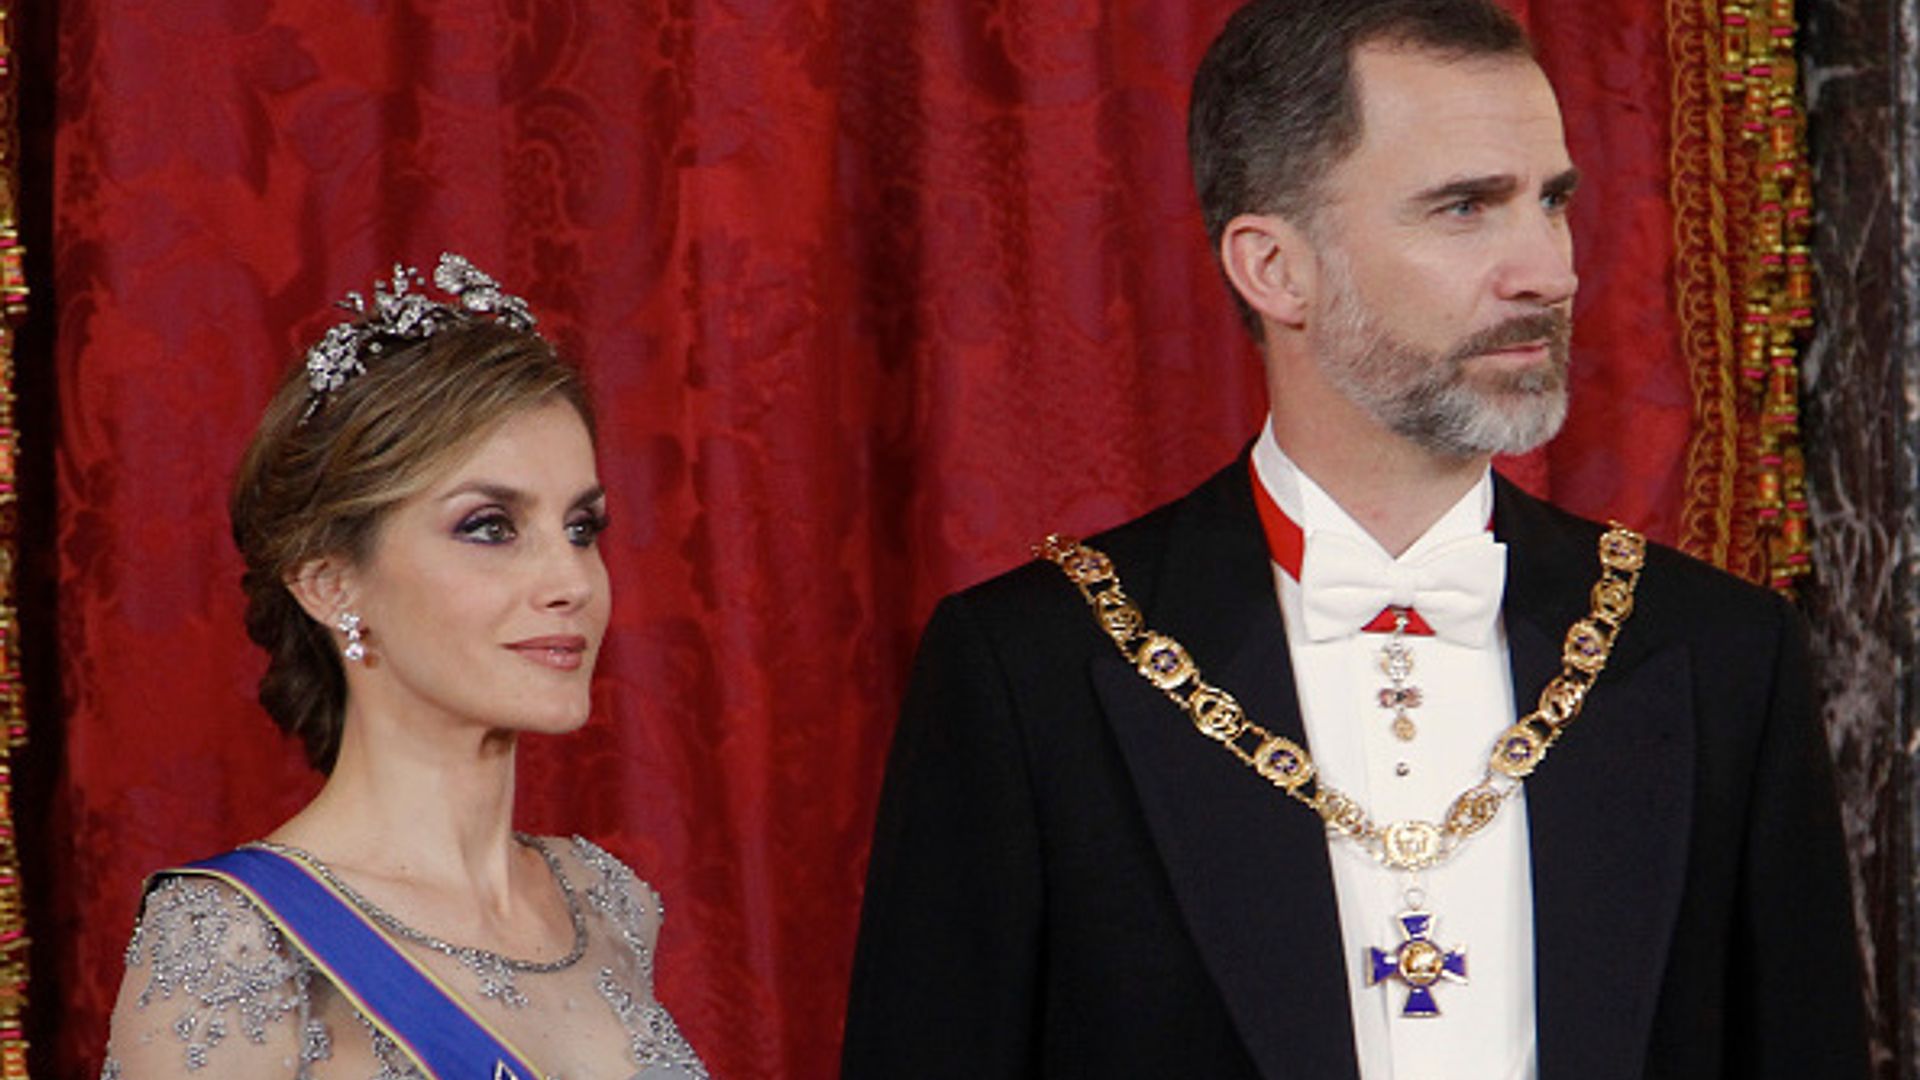 Queen Letizia recycles dazzling gown and tiara for Palace gala